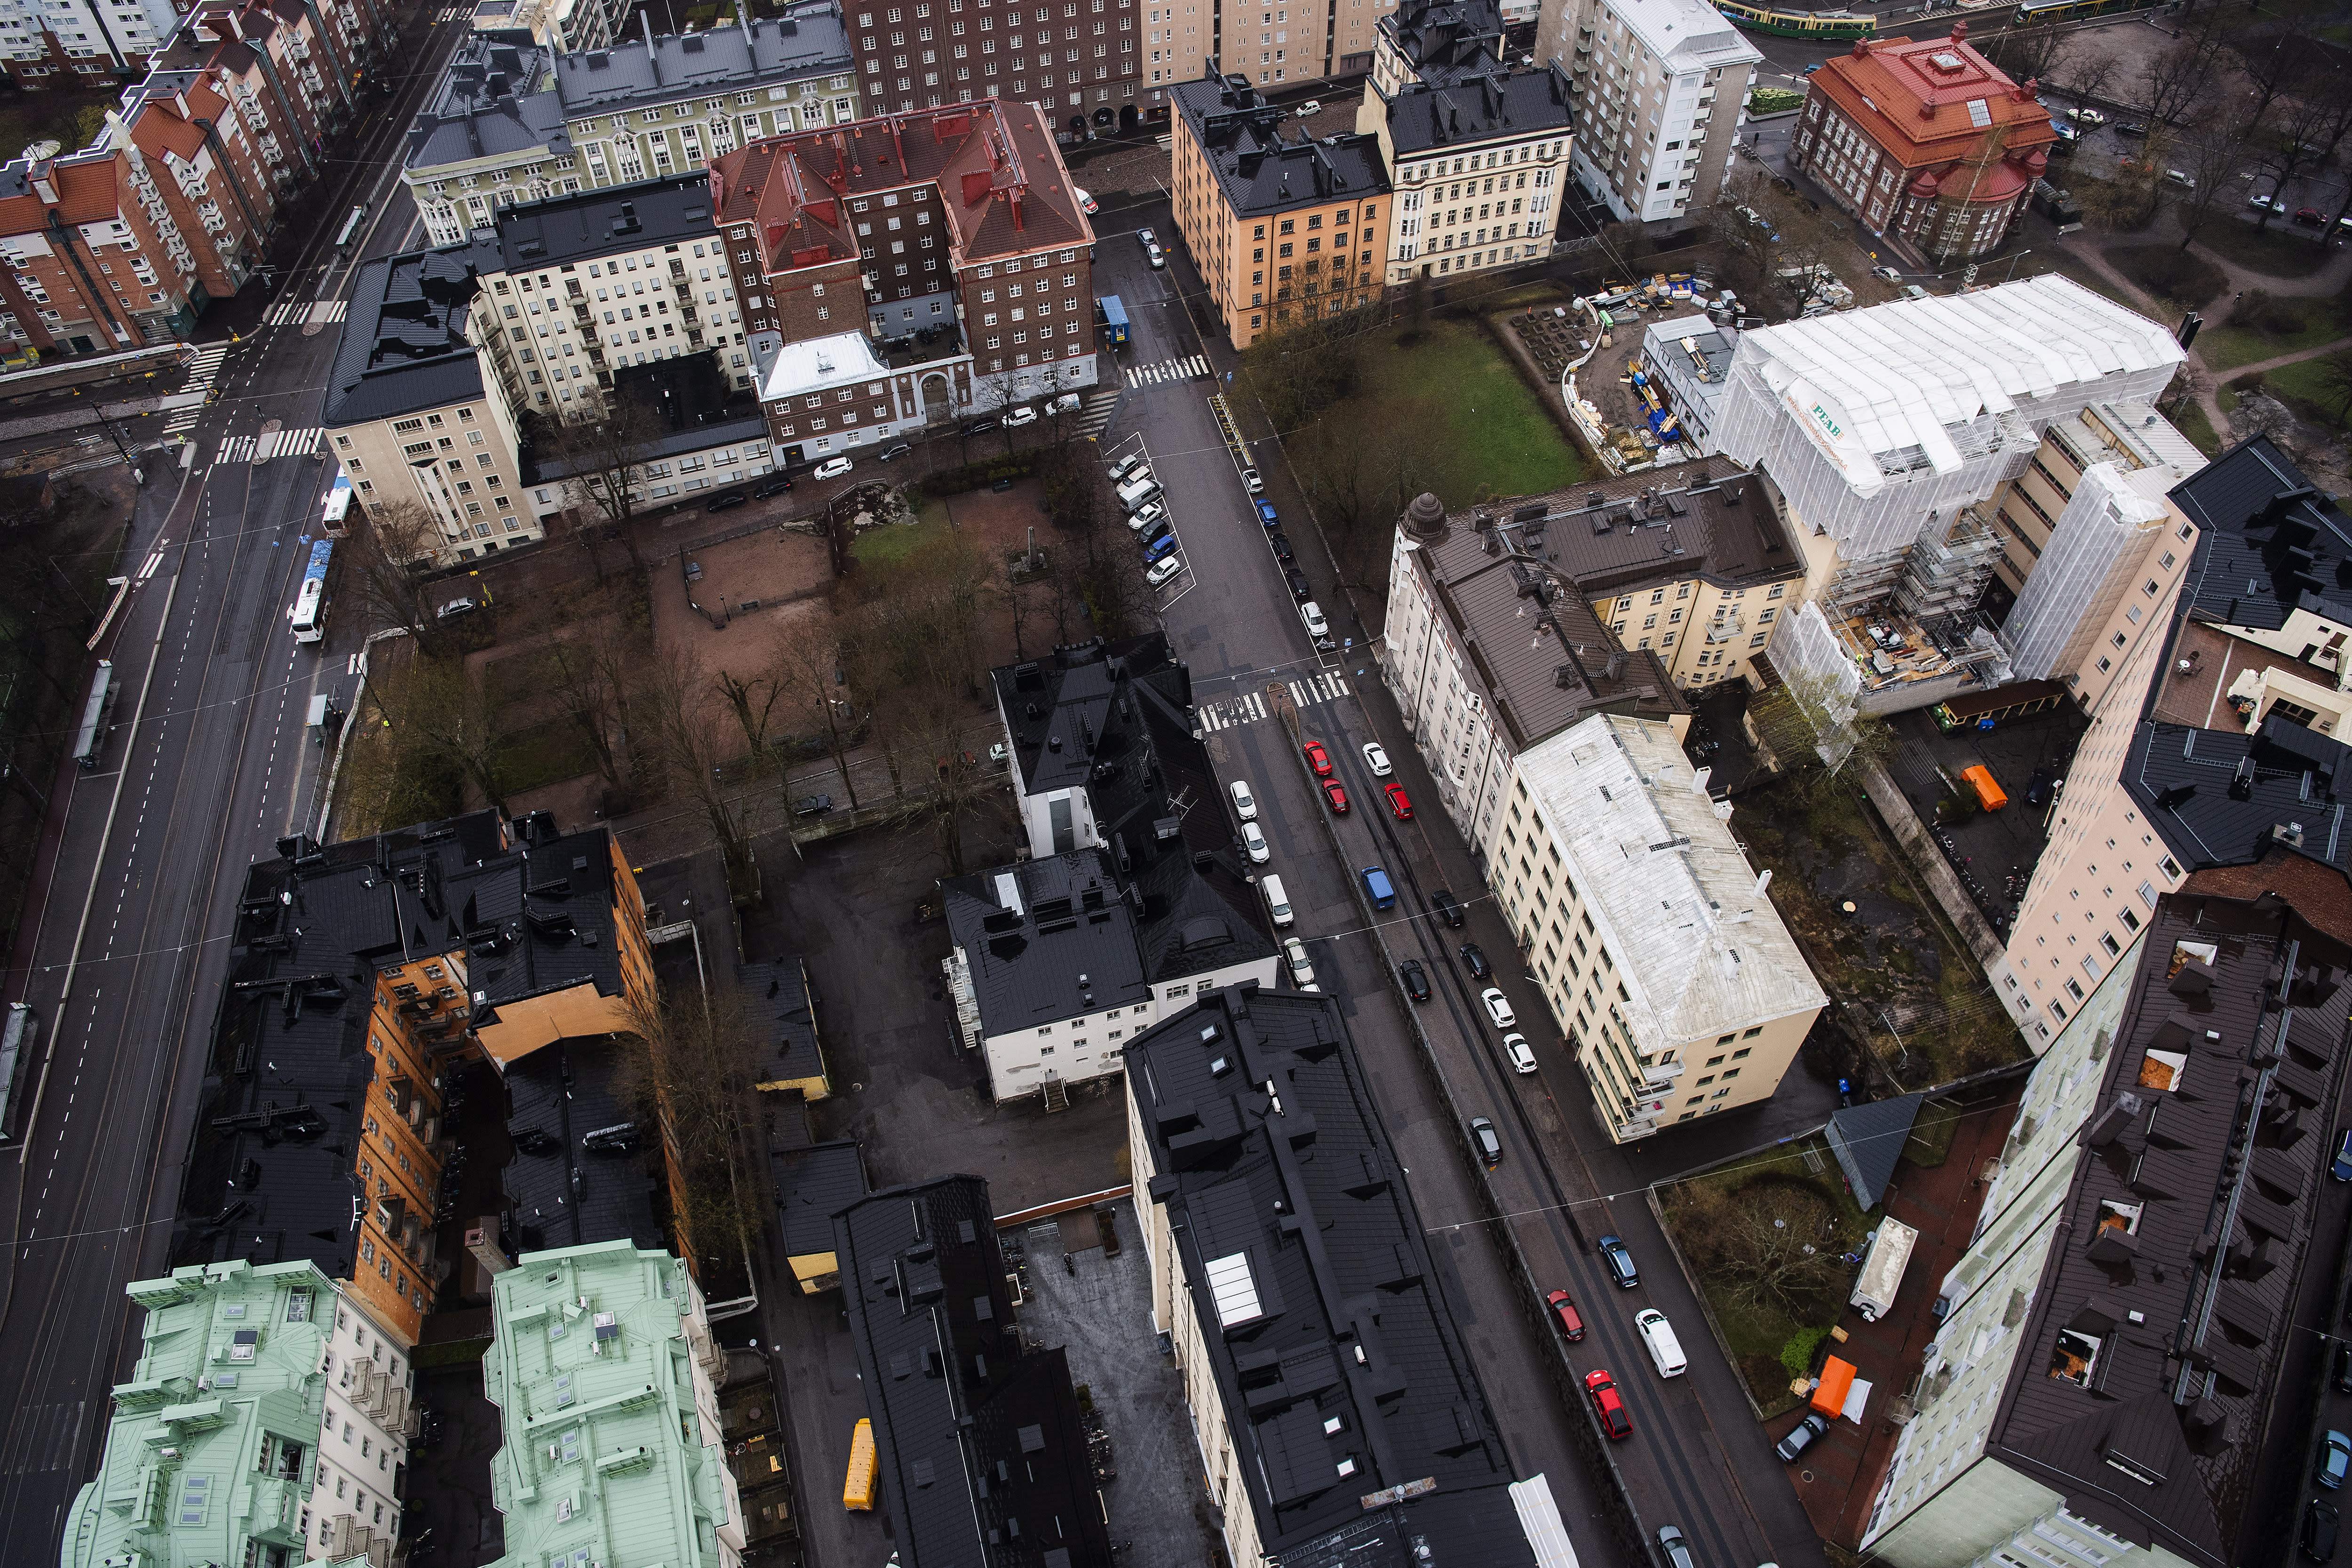 Tenants in the Helsinki metropolitan area enjoy a wider choice, lower rents when supply exceeds demand